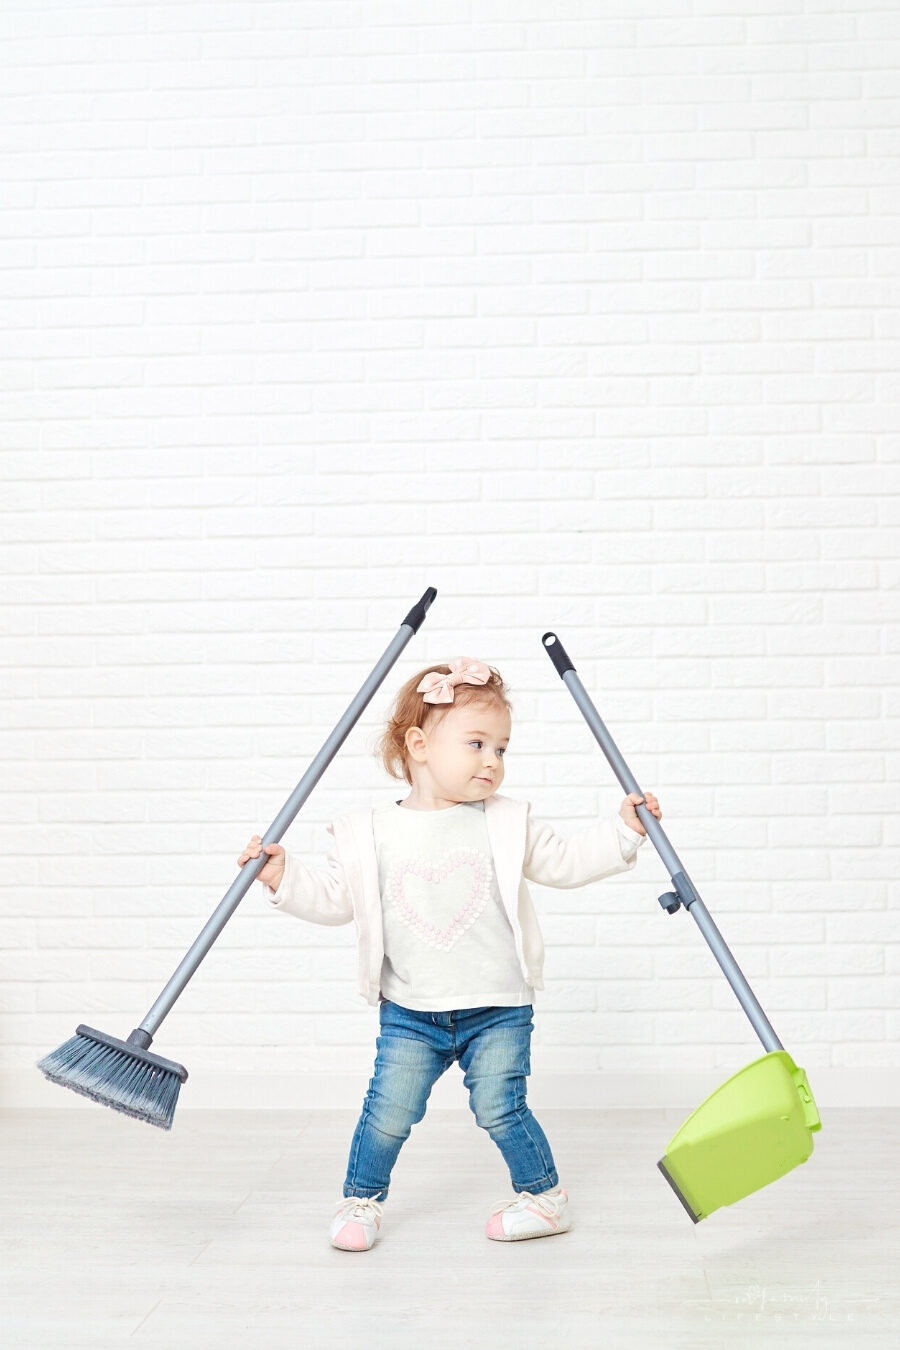 Top Ways To Include Your Kids In The House Chores